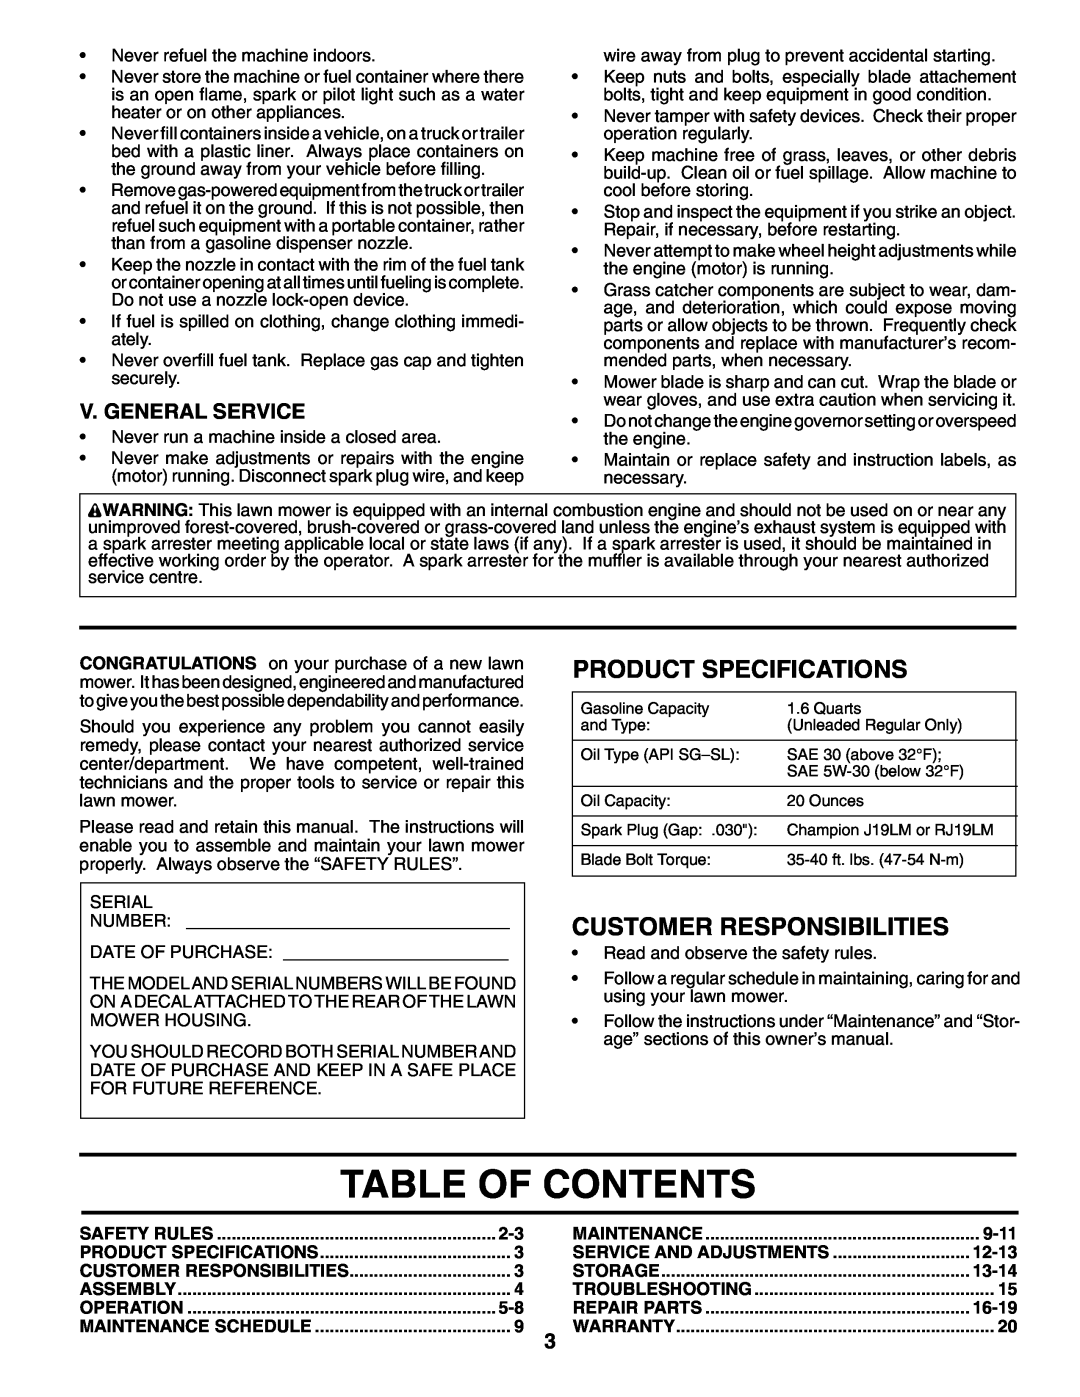 Husqvarna 65021ES Table Of Contents, Product Specifications, Customer Responsibilities, V. General Service, 9-11, 12-13 